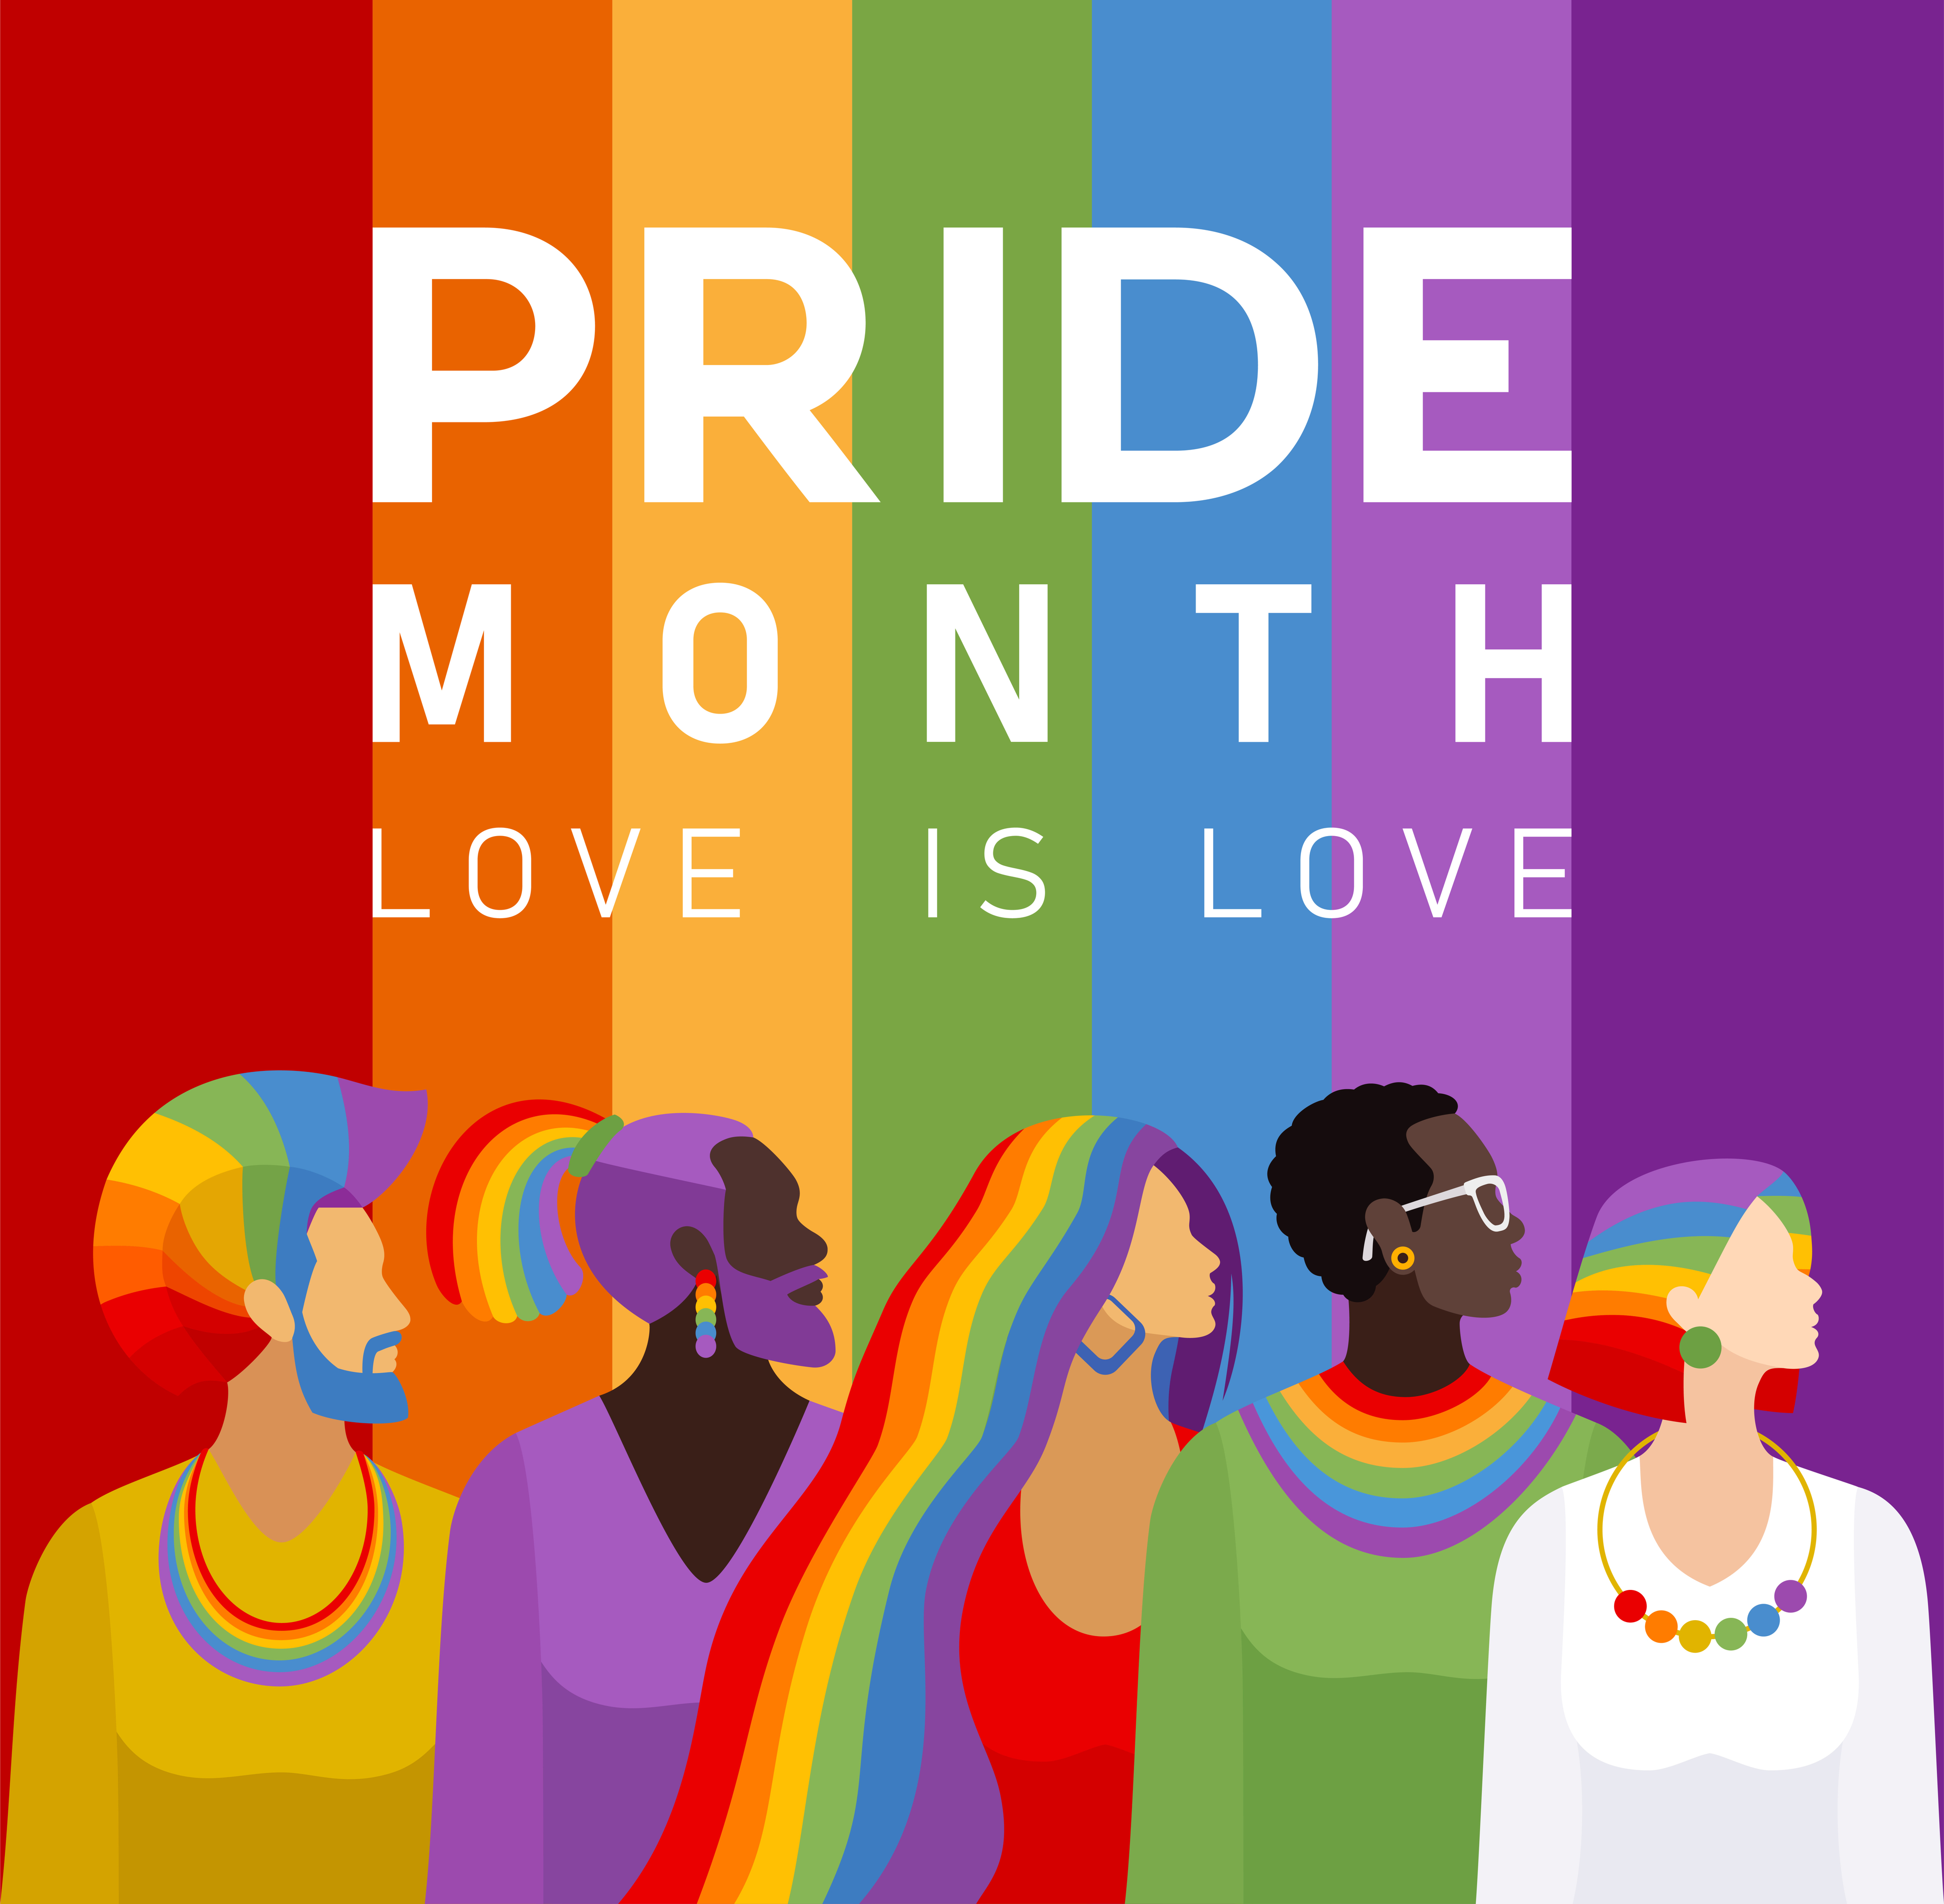 Illustration of diverse people with rainbow-themed hair and outfits, under the text &quot;PRIDE MONTH: LOVE IS LOVE&quot; on a rainbow-striped background